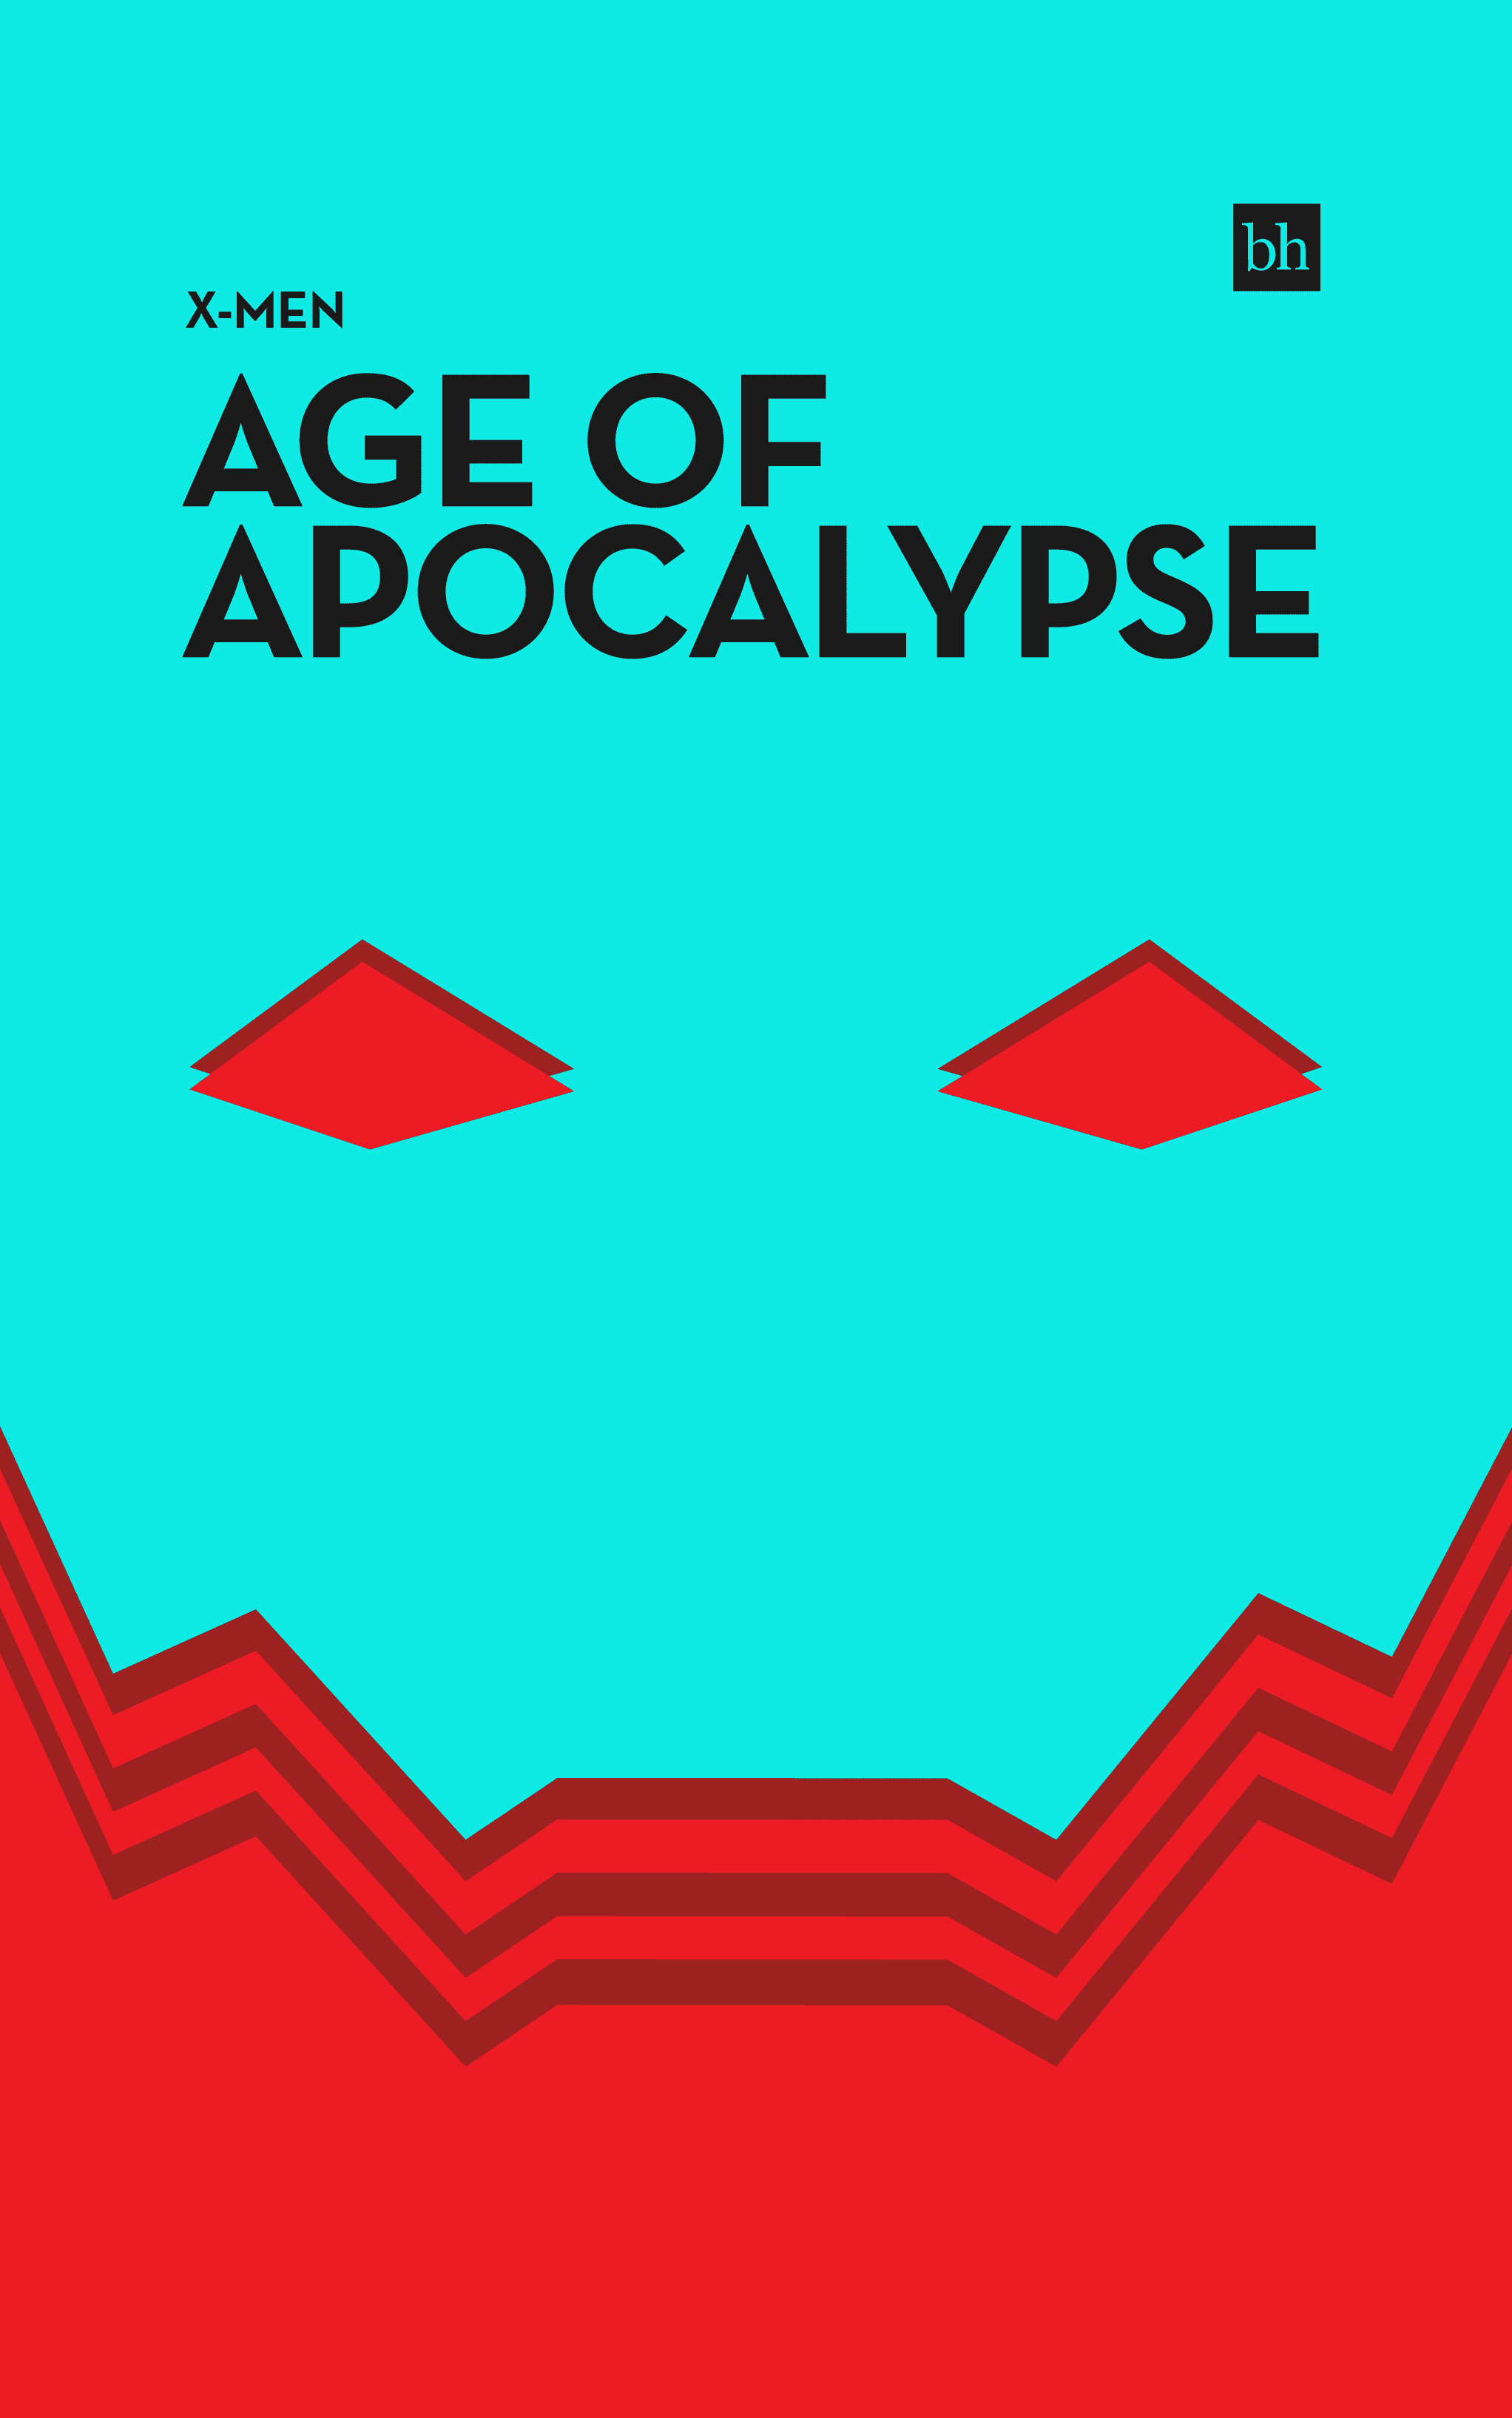 Book cover mock thumbnail for X-Men: Age of Apocalypse